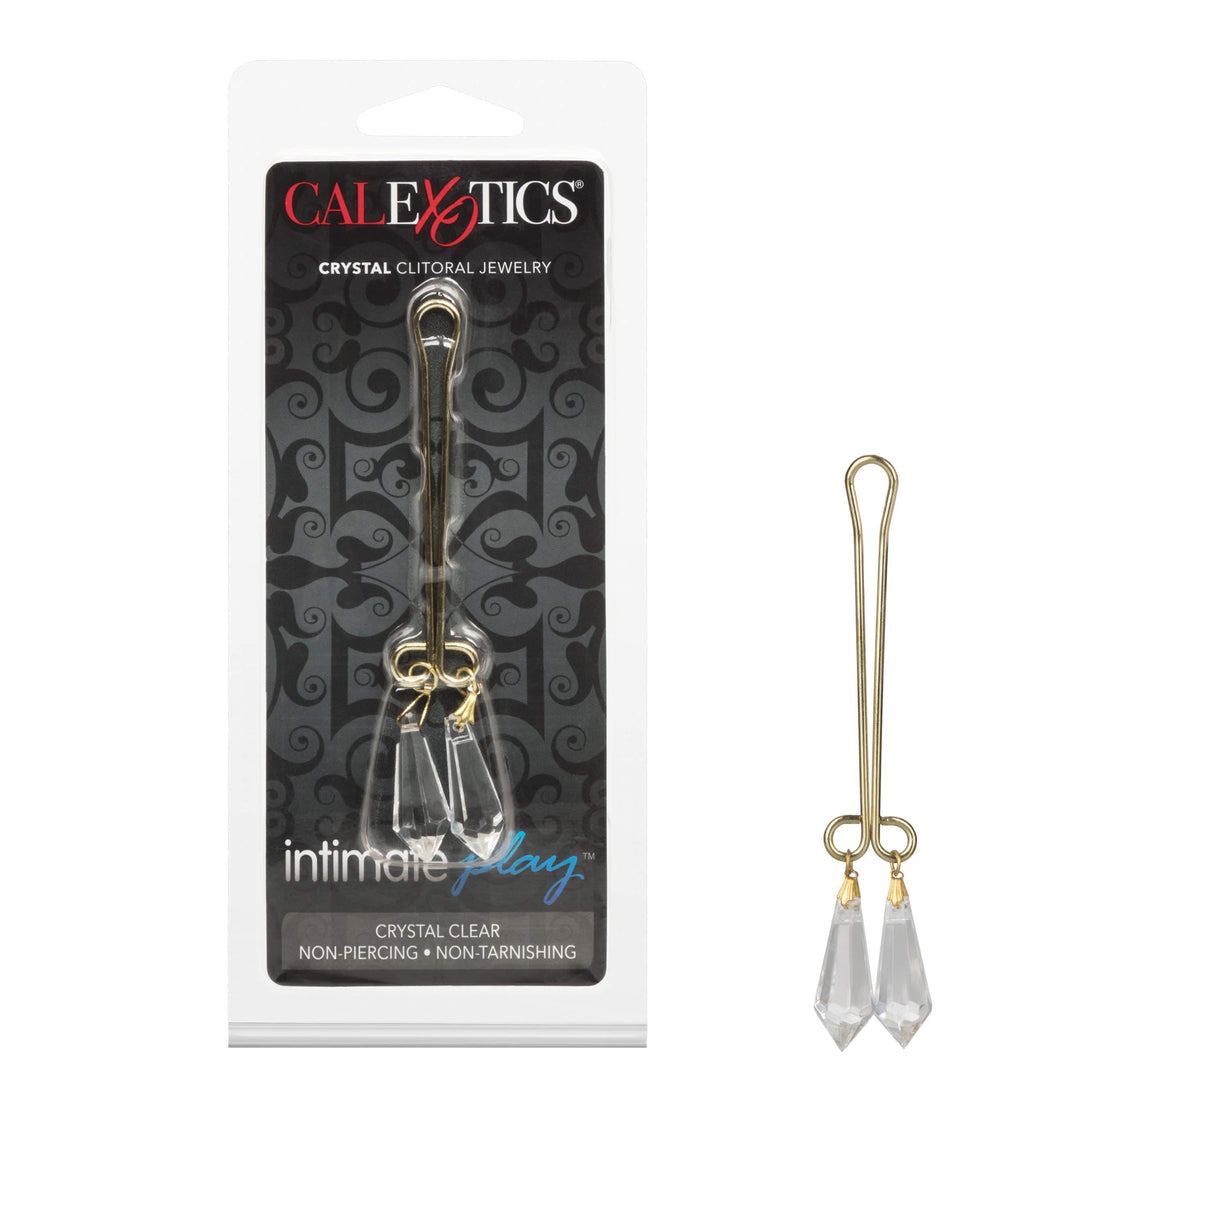 California Exotics - Intimate Play Crystal Clitoral Jewelry Clamp (Gold) CE1822 CherryAffairs